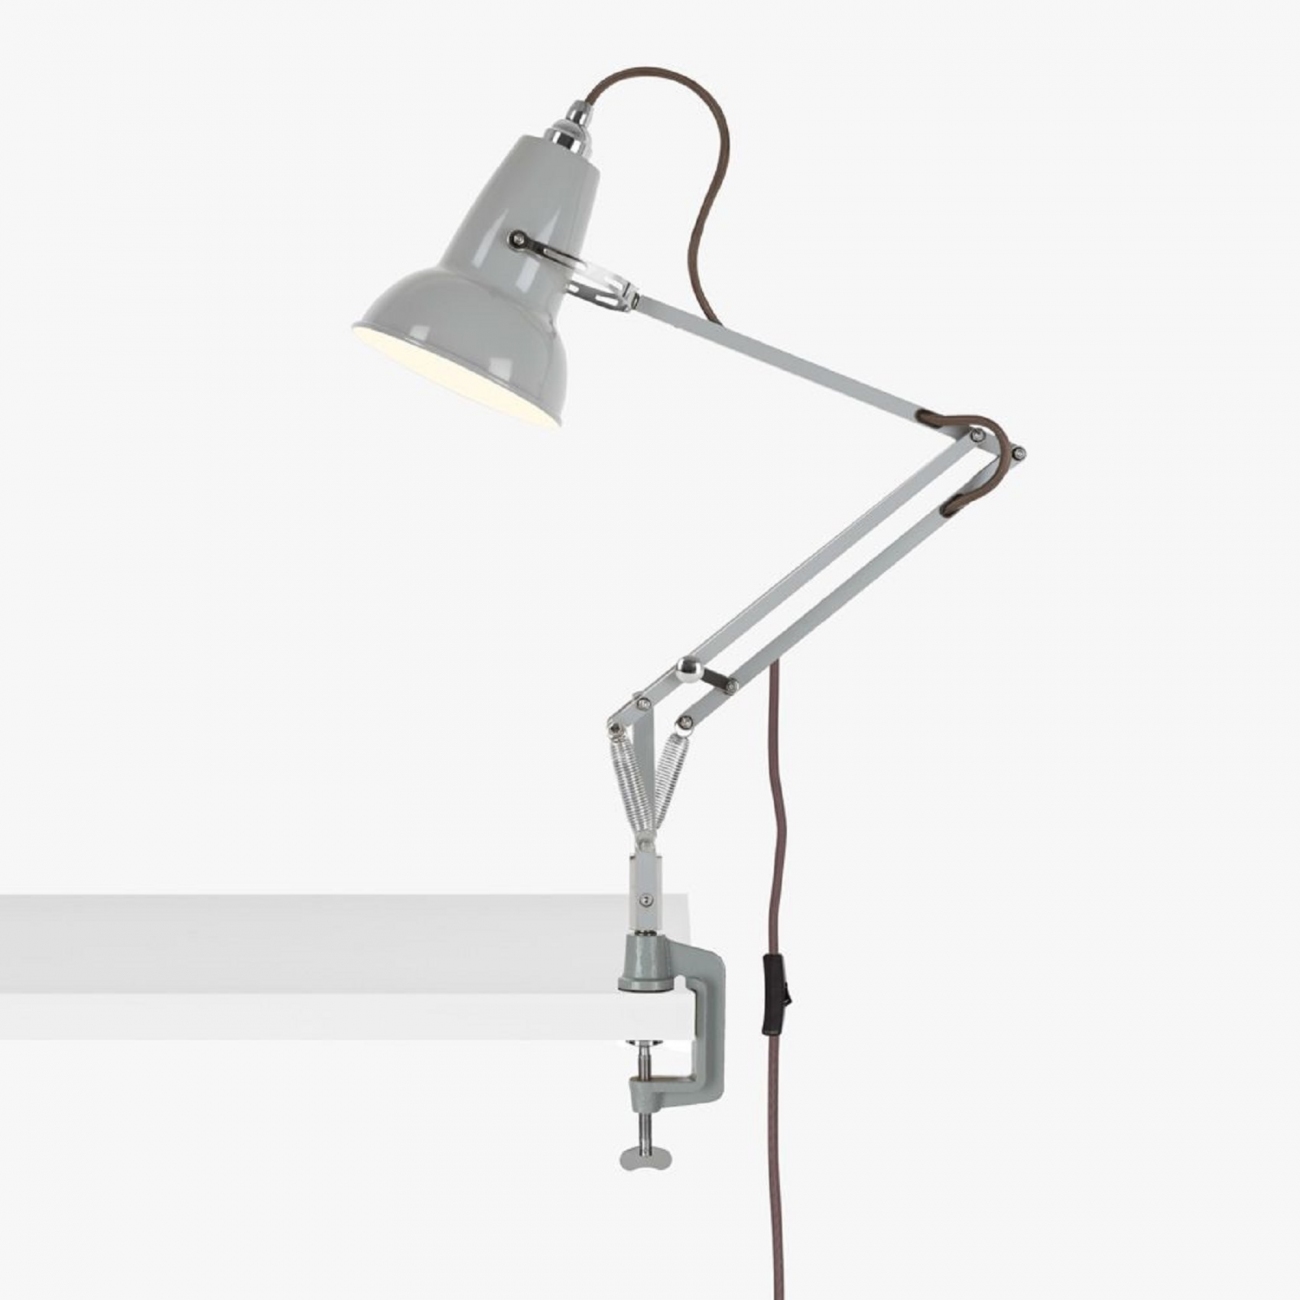 ANGLEPOISE ORIGINAL 1227 MINI LAMP WITH DESK CLAMP